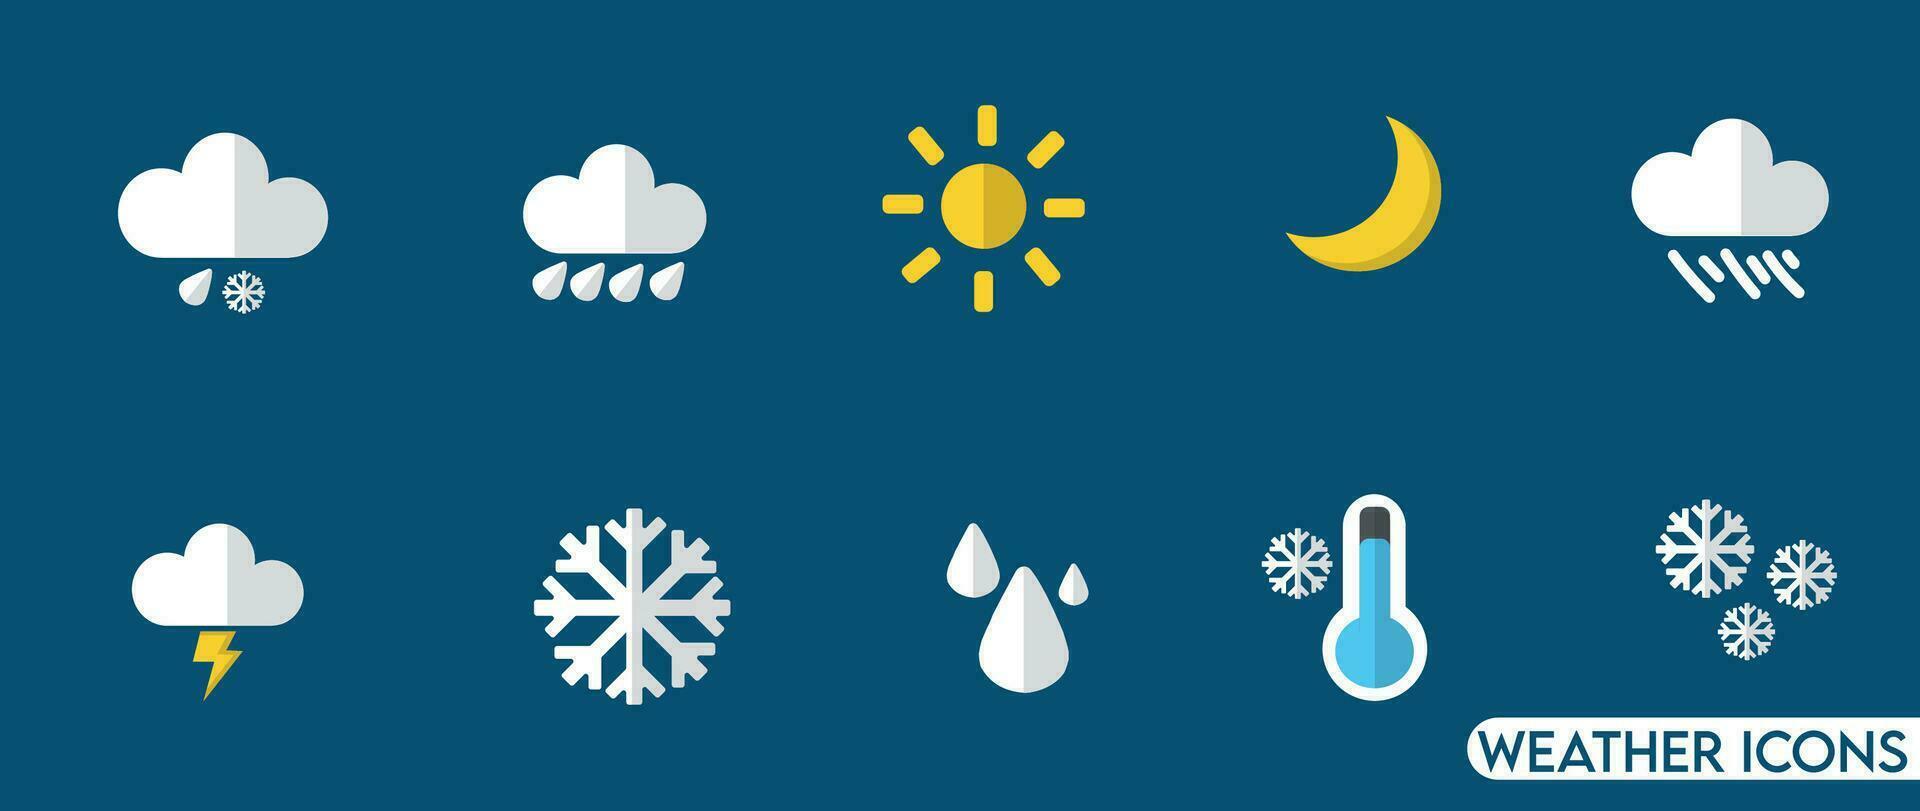 Weather icon set vector illustration. Weather conditions icons